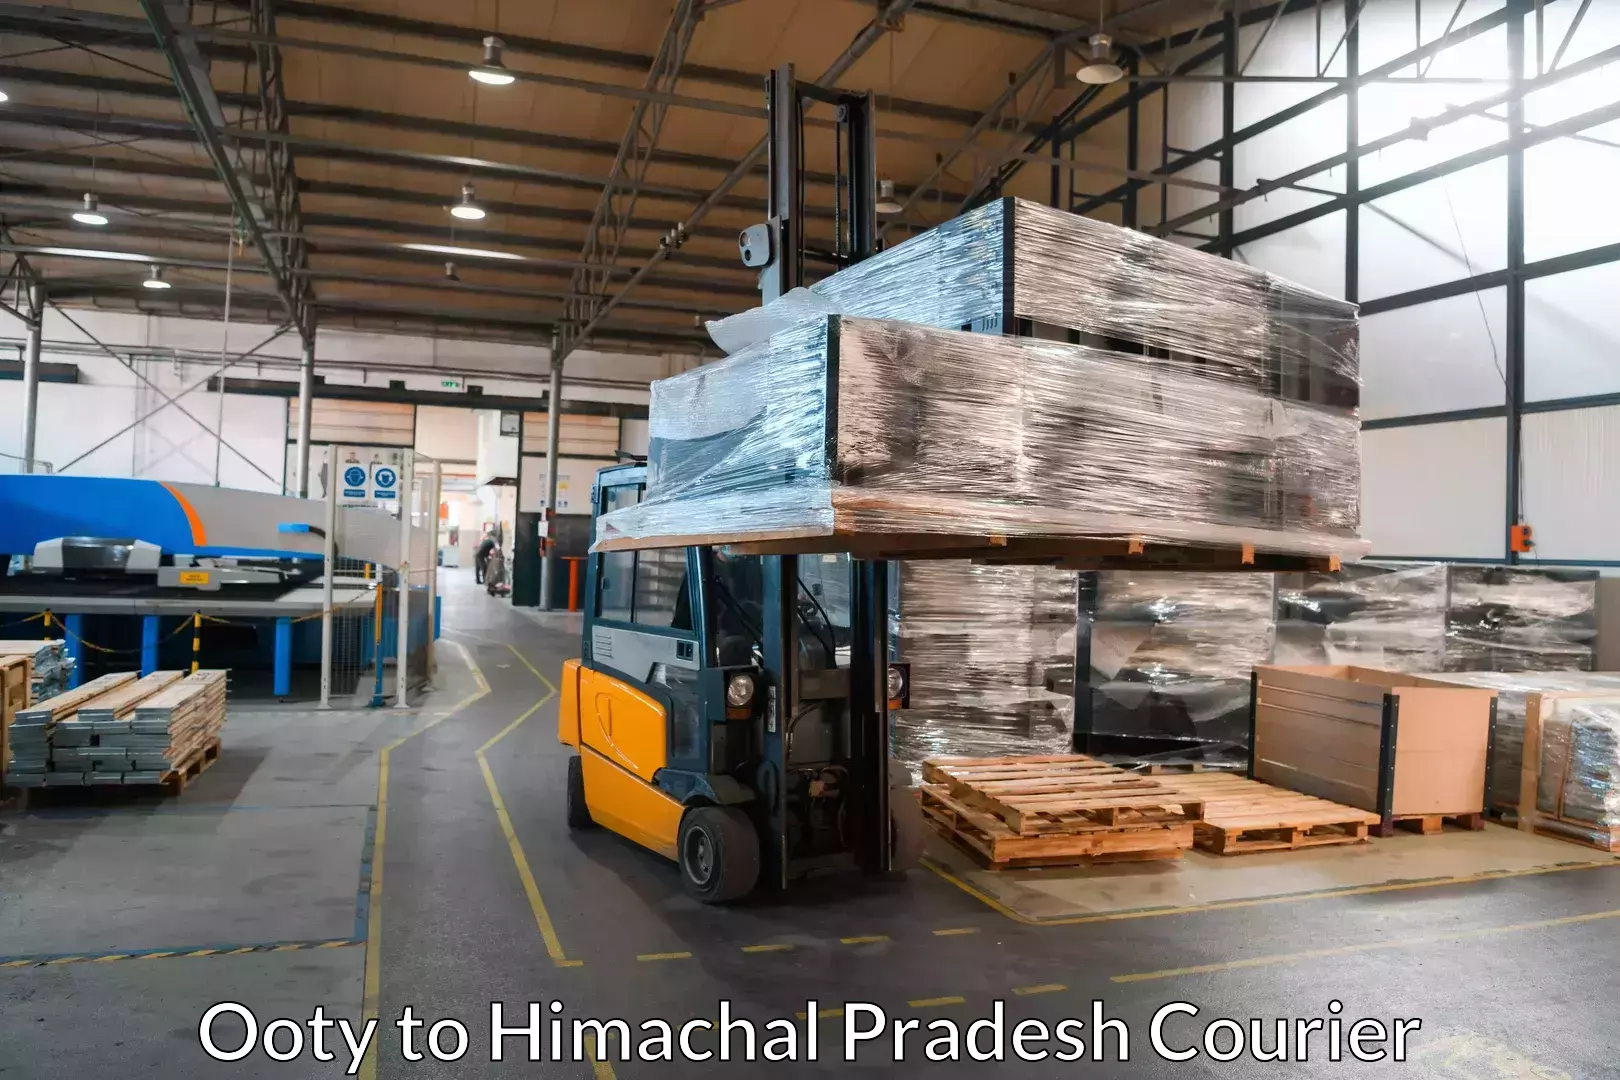 Furniture transport professionals Ooty to Himachal Pradesh